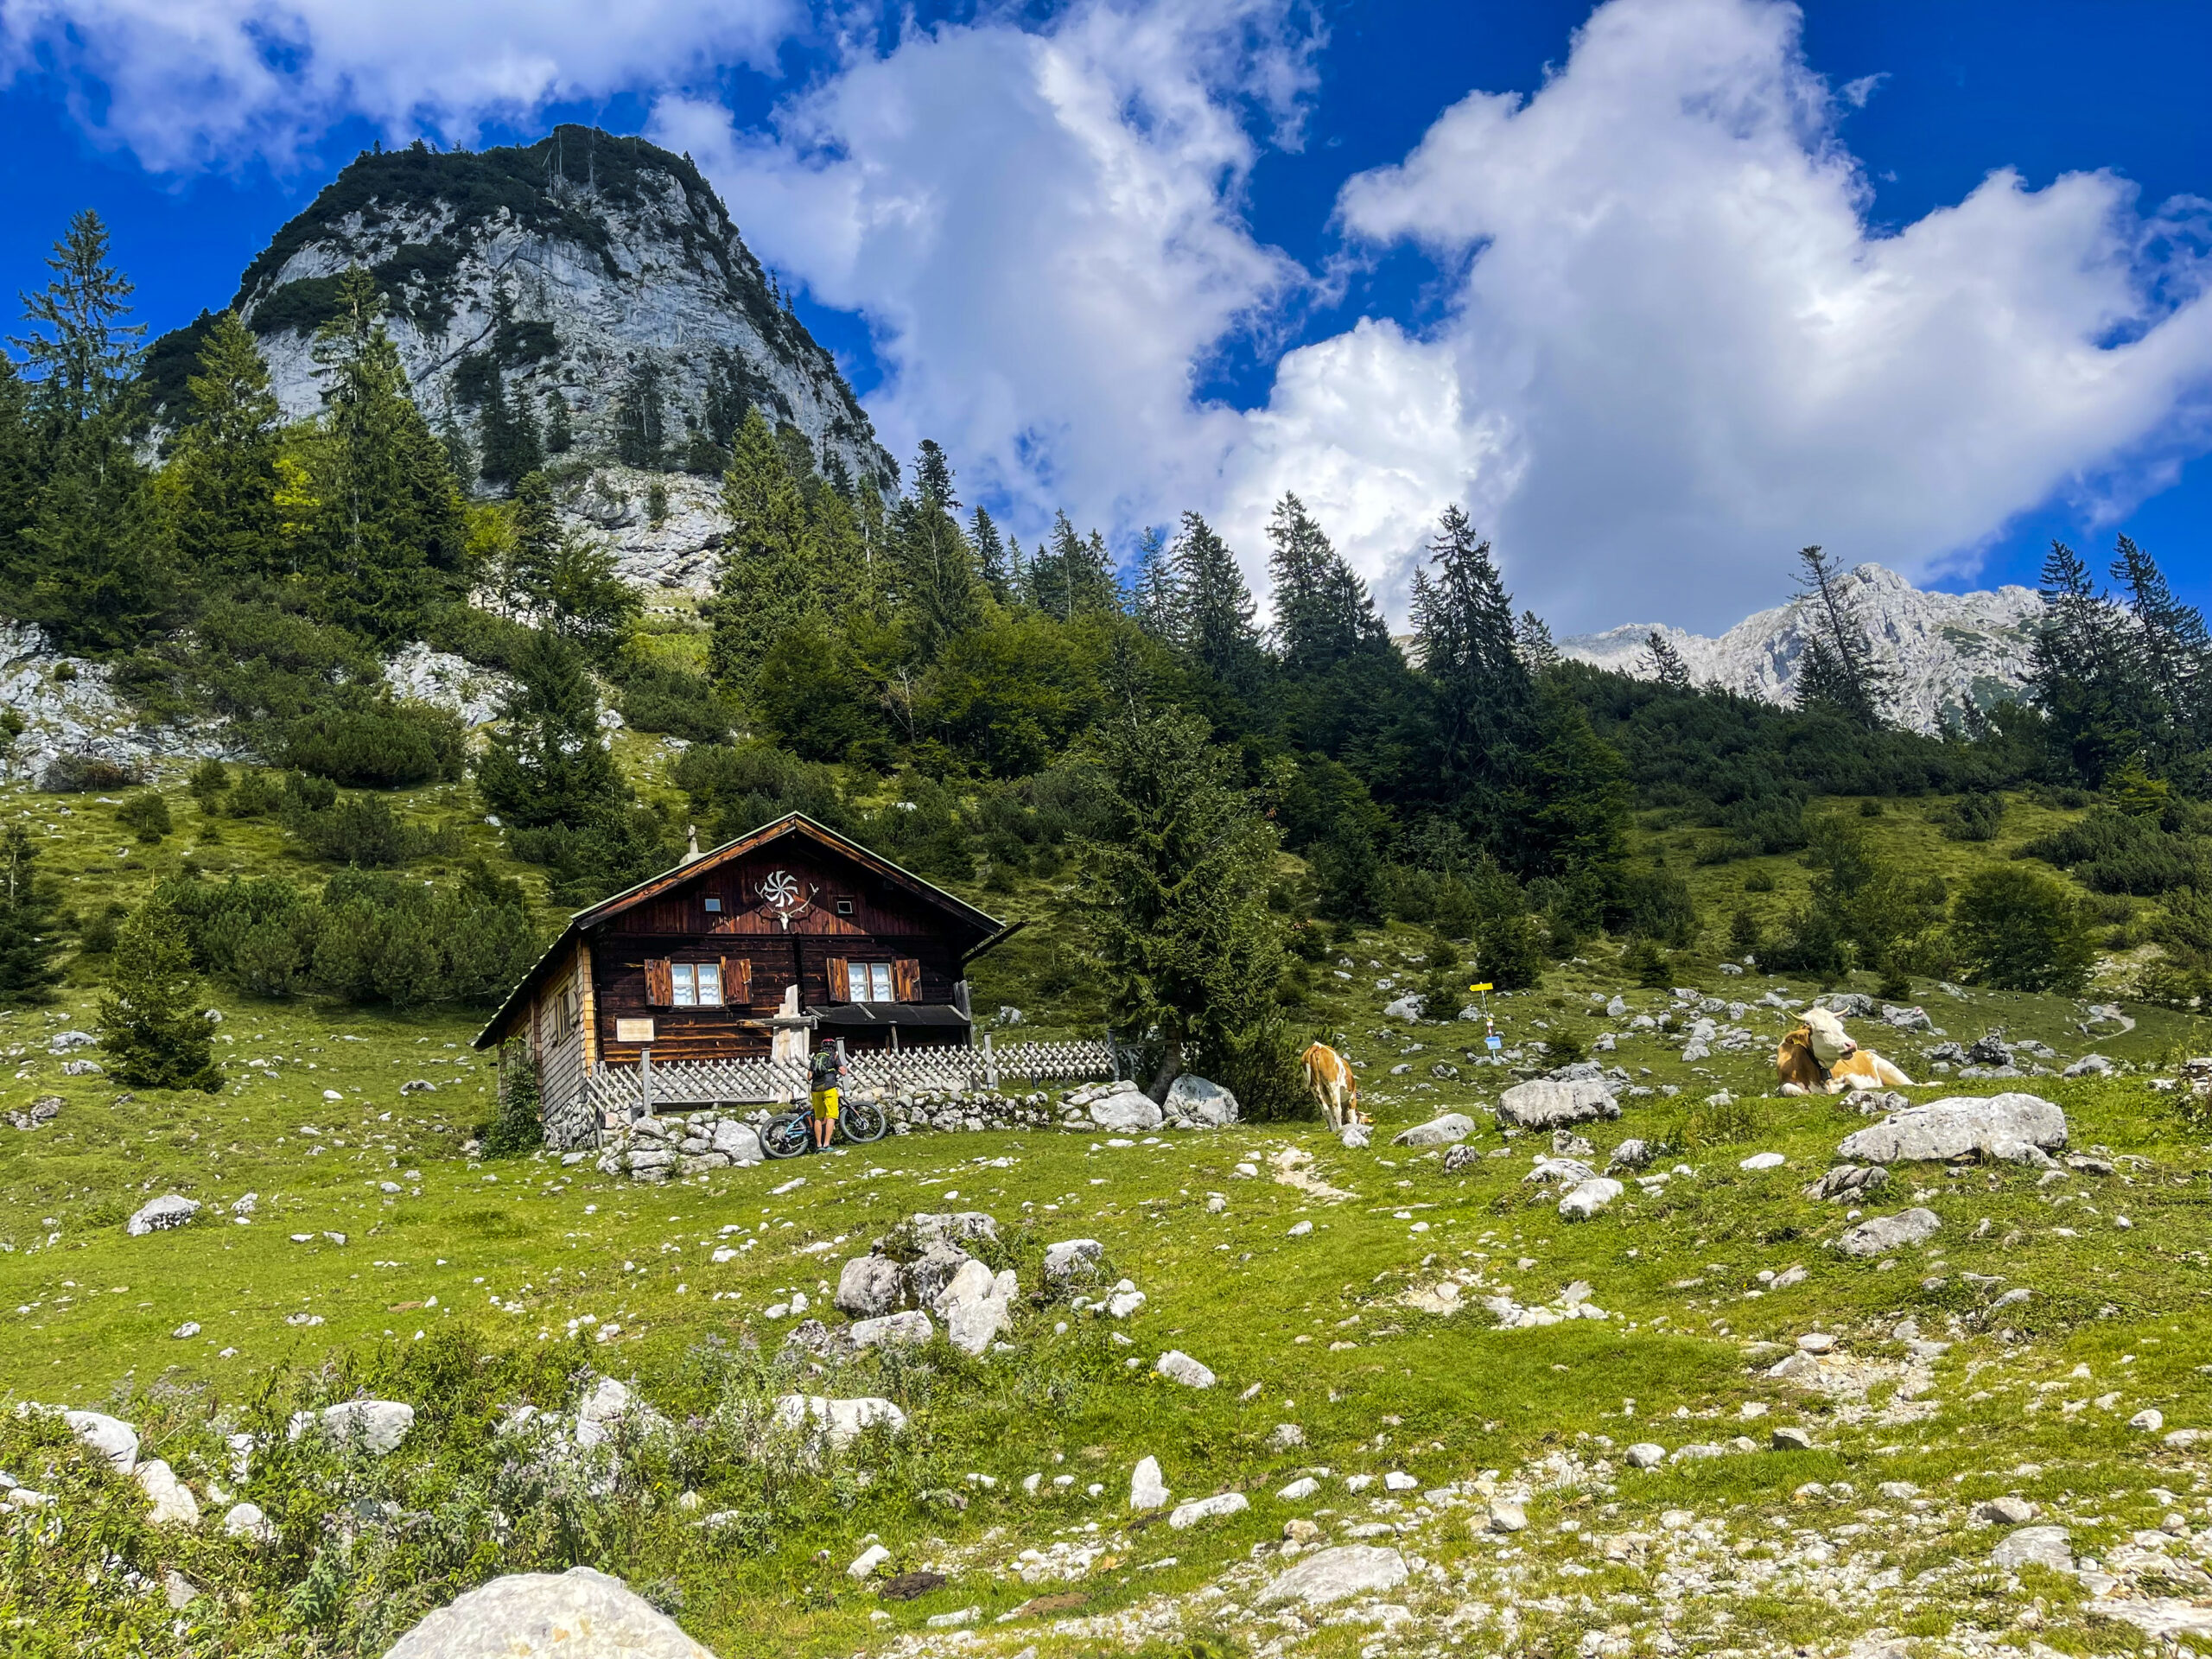 A multi-day hike in the land of the Wilder Kaiser and the “Bergdoktor” is waiting for you to join him.